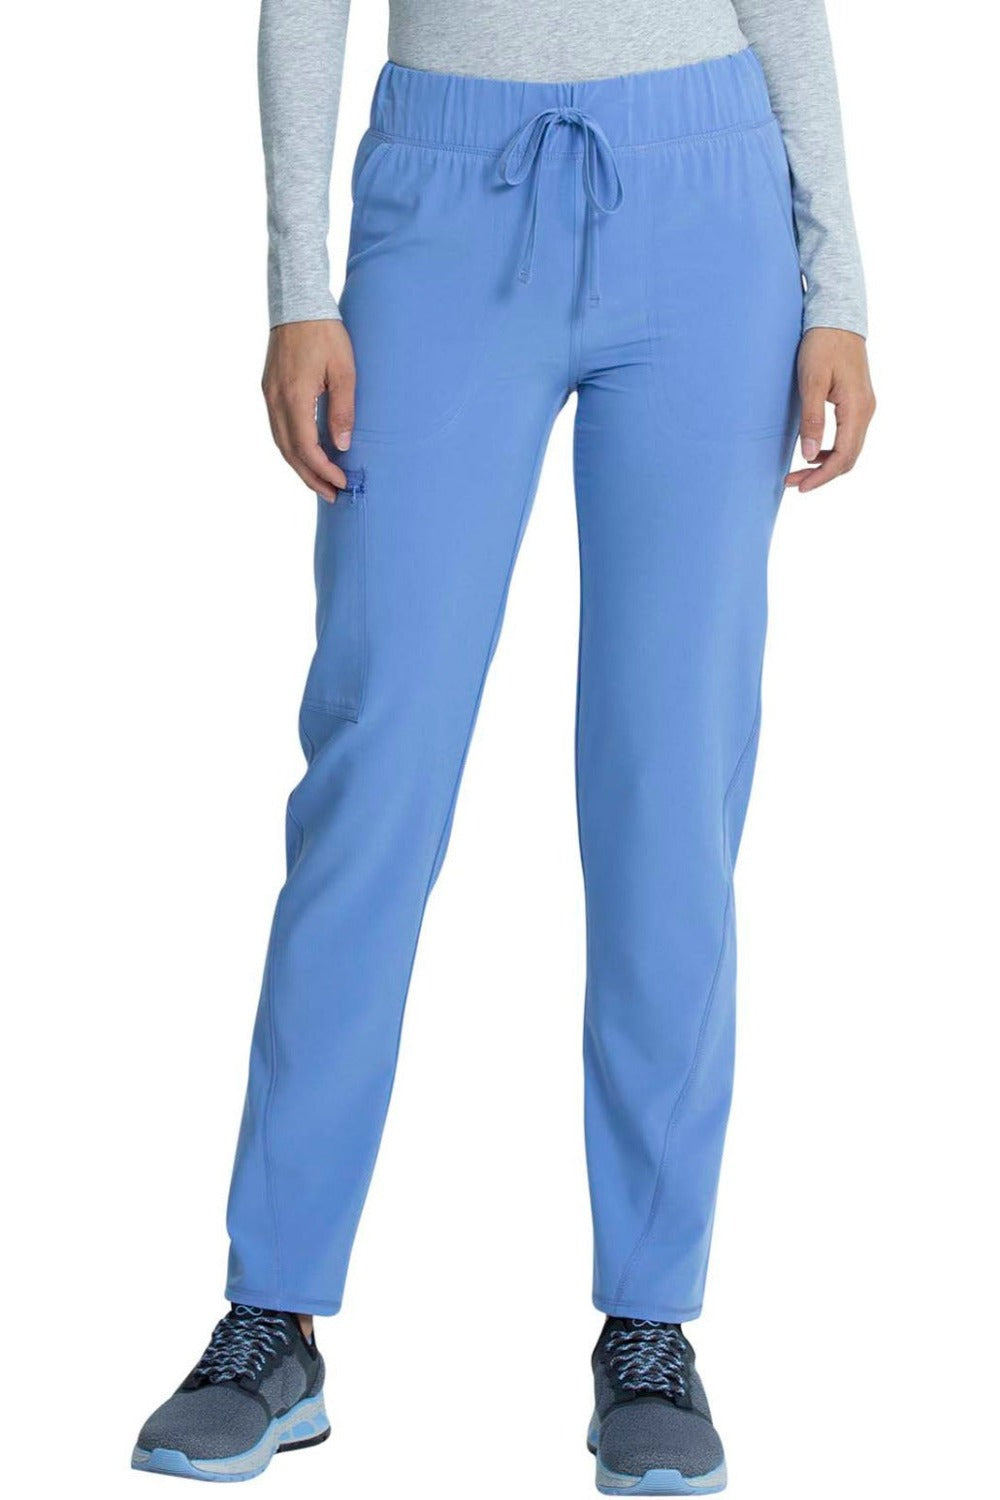 Cherokee Allura Petite Scrub Pant Mid Rise Tapered Leg Drawstring in Ciel at Parker's Clothing and Shoes.